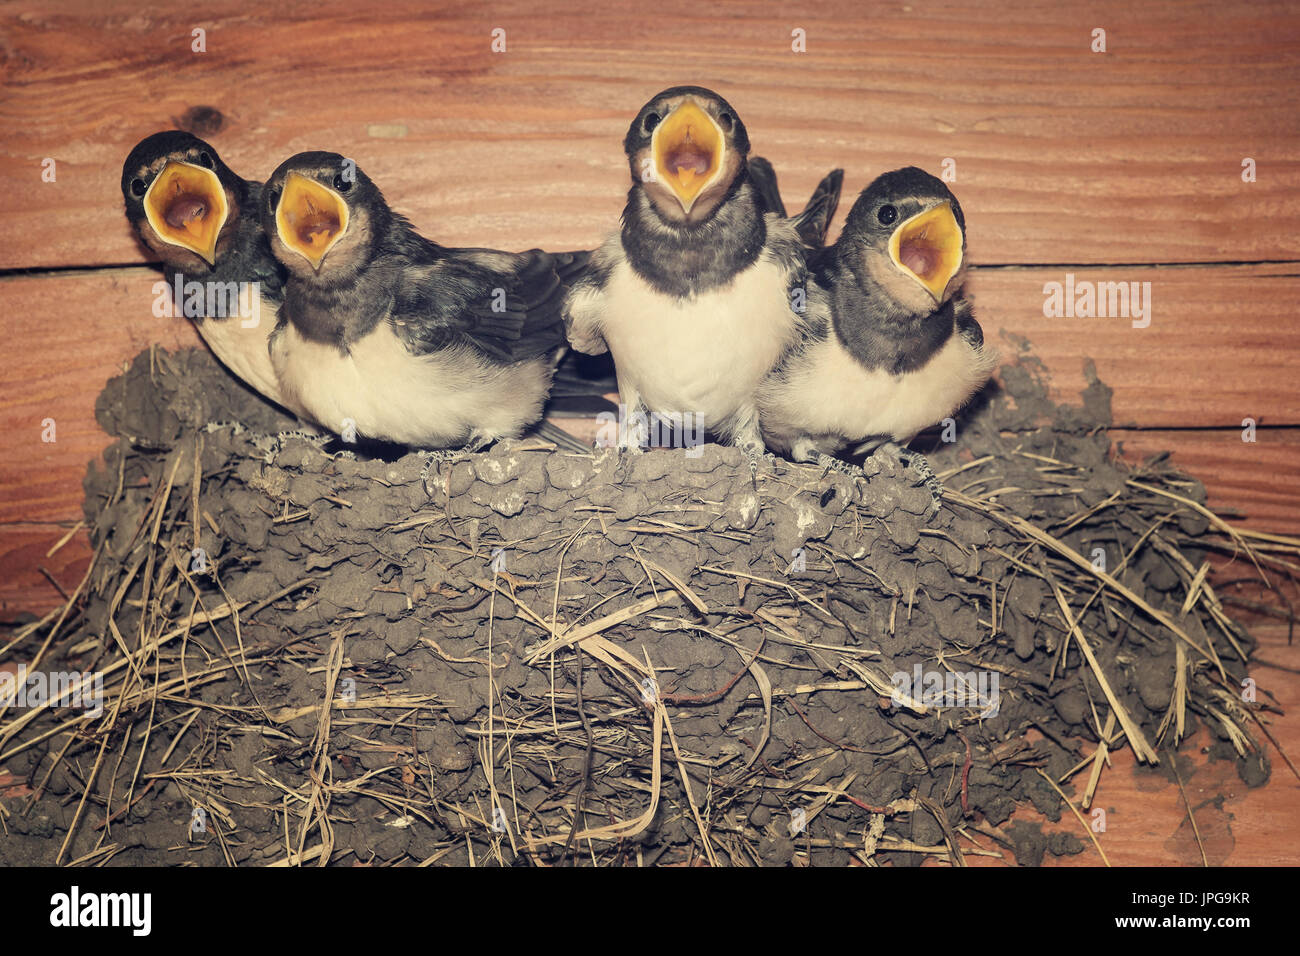 Feed me! Demanding swallow chicks begging for food Stock Photo